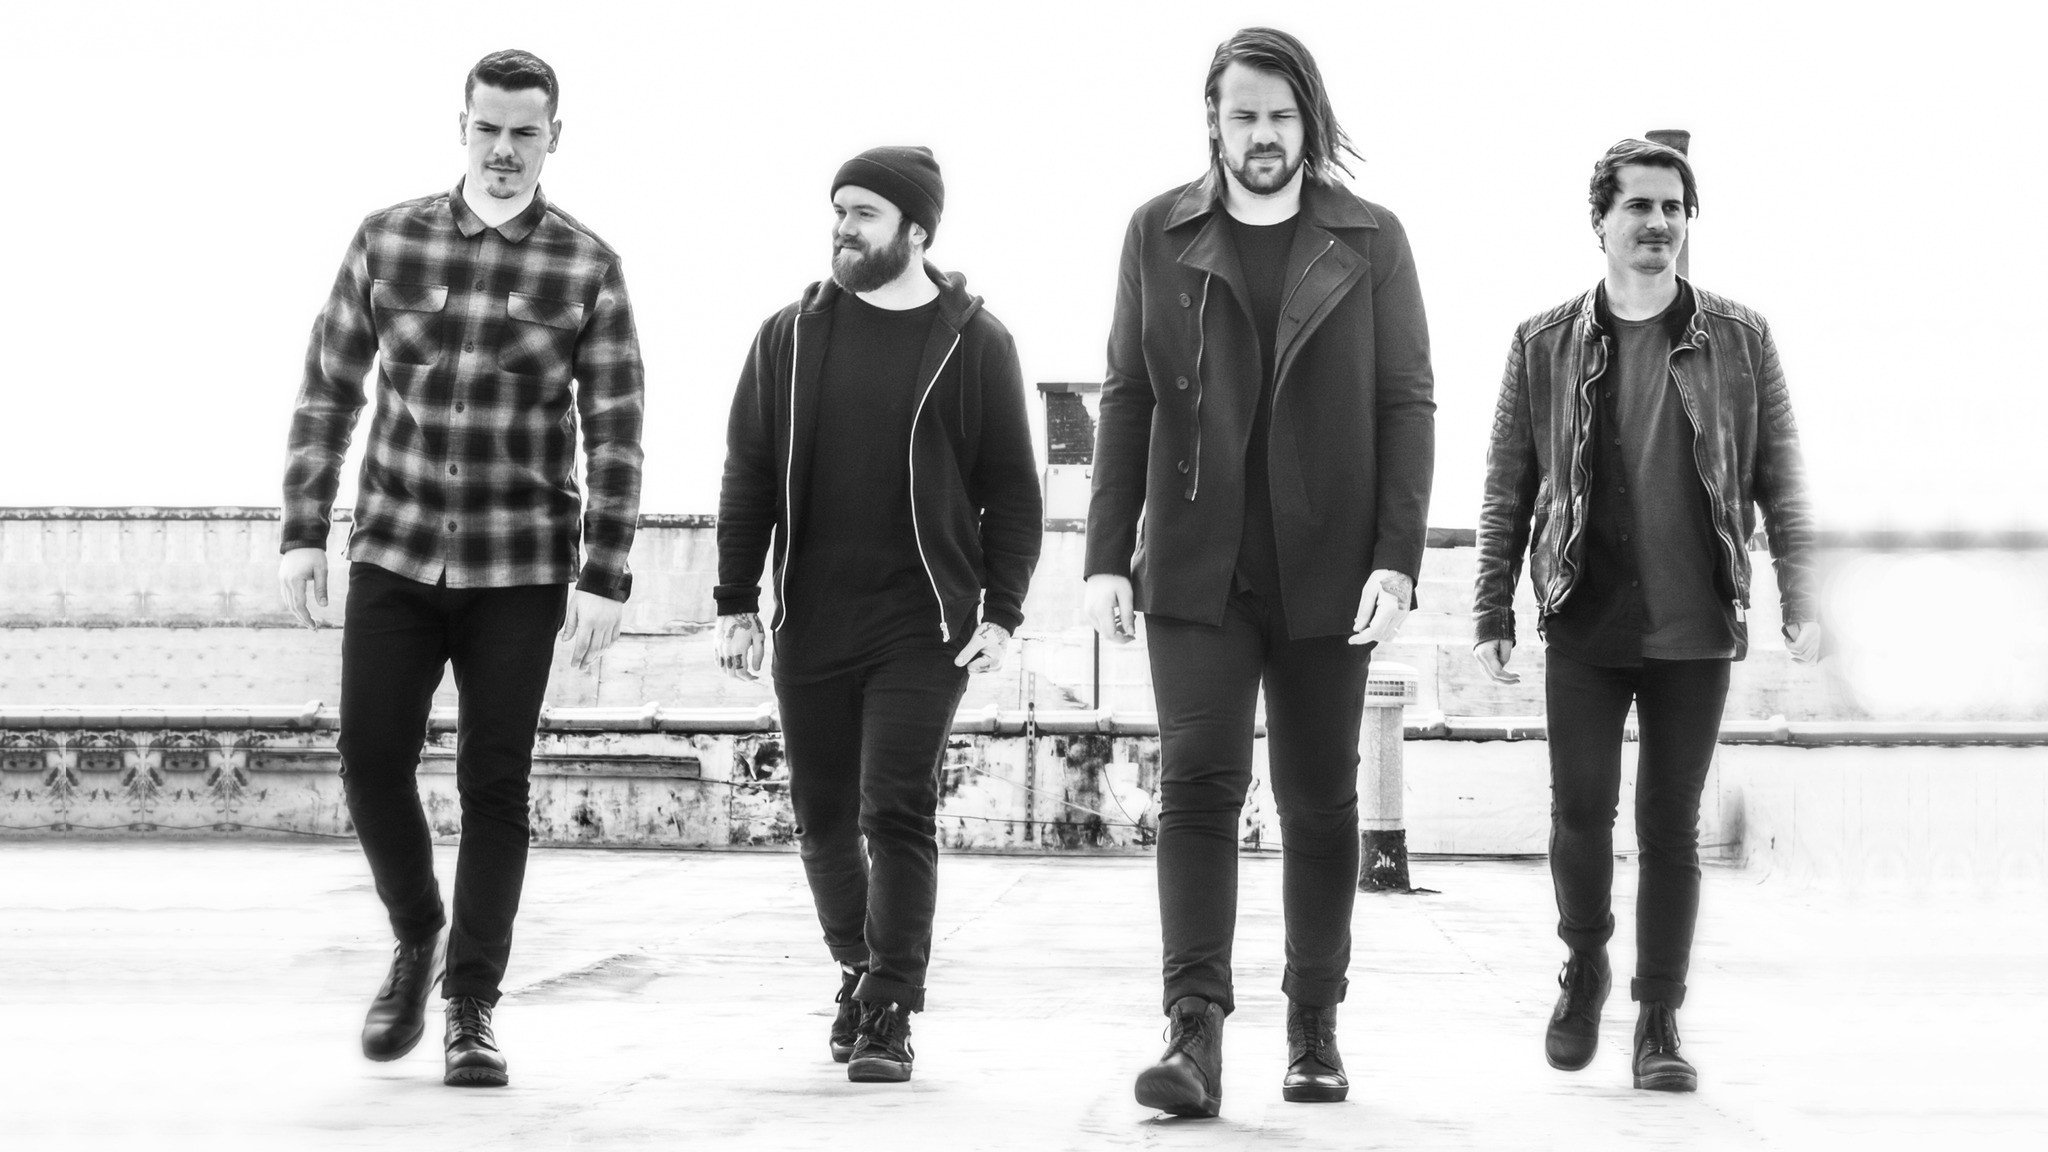 Monochrome HD wallpaper featuring four members of a band walking in unison, suitable for desktop background tagged with Beartooth.